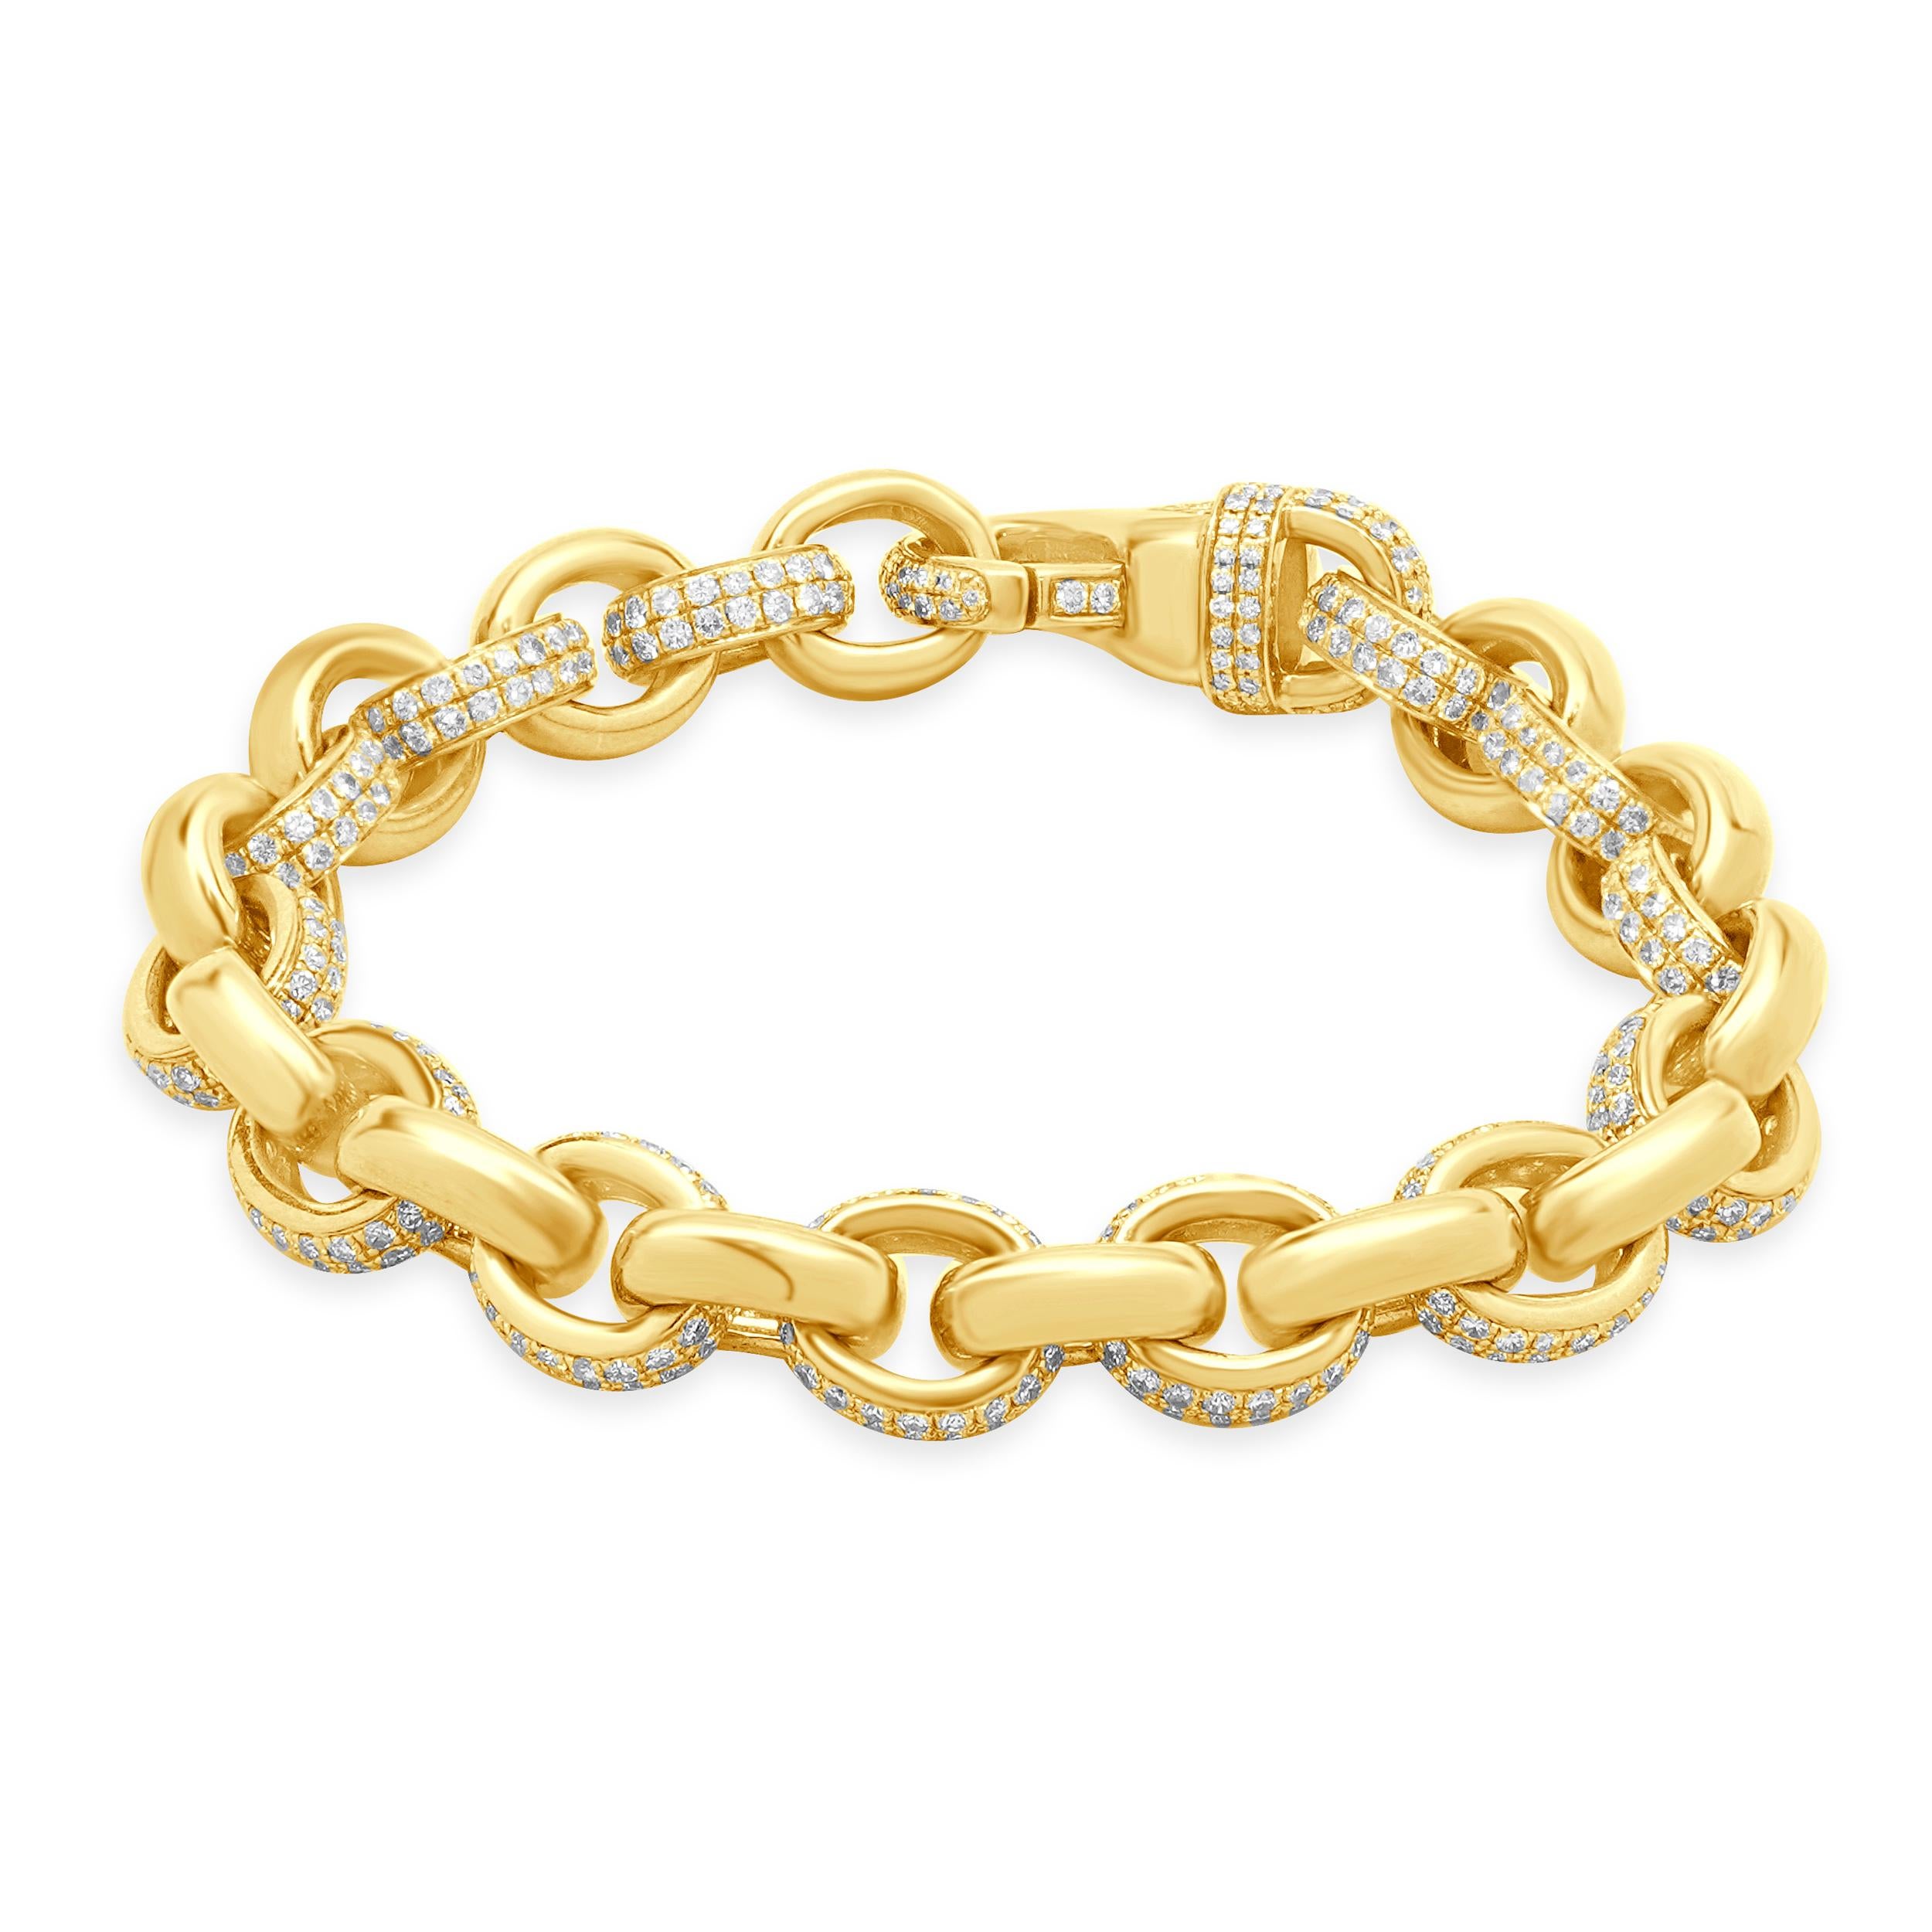 Designer: custom design
Material: 18K yellow Gold
Diamond: 661 round brilliant cut= 5.35cttw
Color: G
Clarity: VS
Dimensions: bracelet will fit up to a 7-inch wrist
Weight: 33.26 grams
